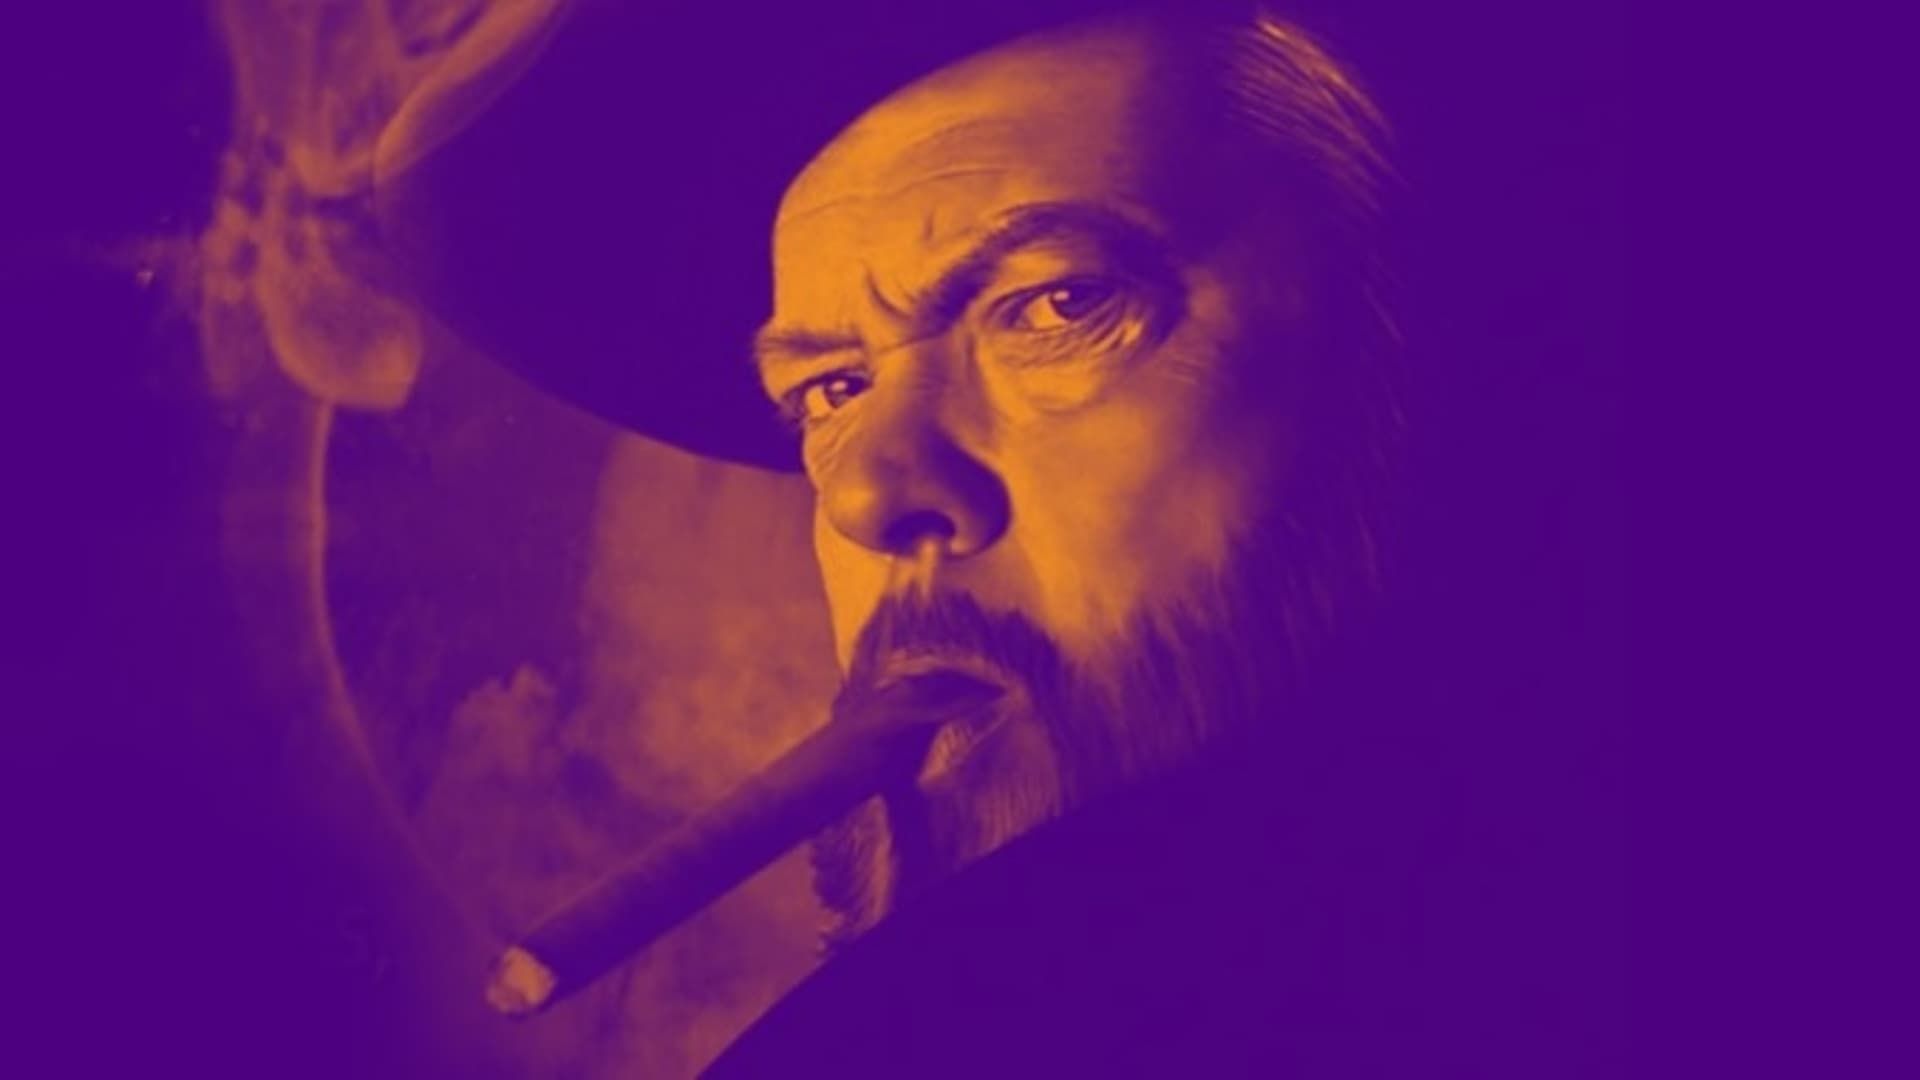 Orson Welles' Great Mysteries background